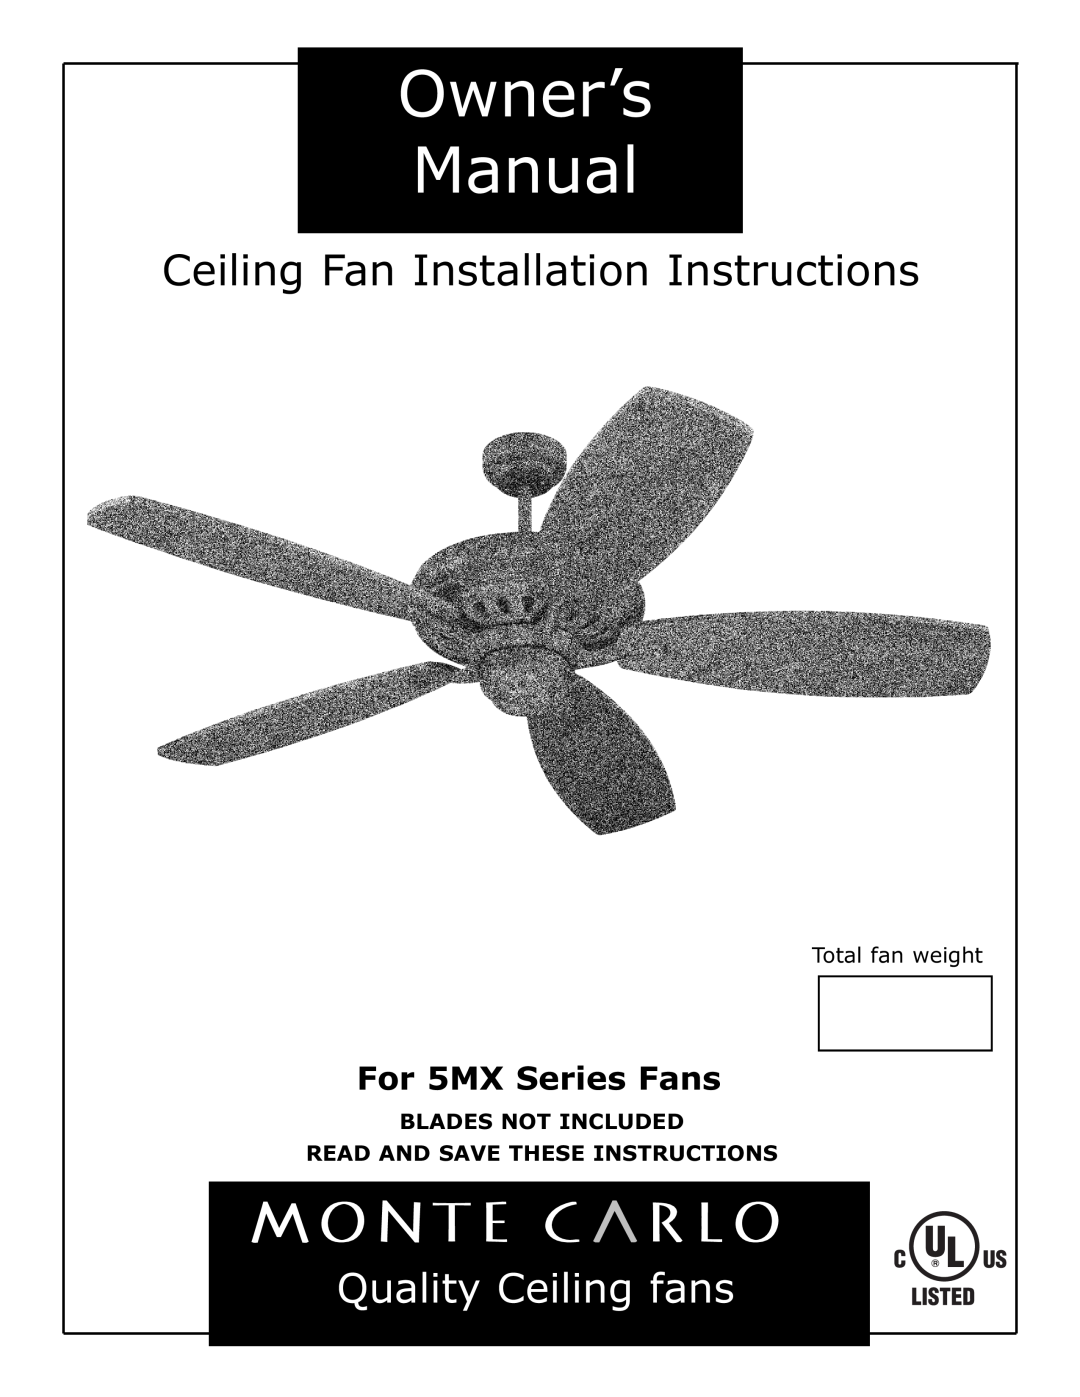 Monte Carlo Fan Company 5MX owner manual Owner’s Manual, Ceiling Fan Installation Instructions, Quality Ceiling fans 